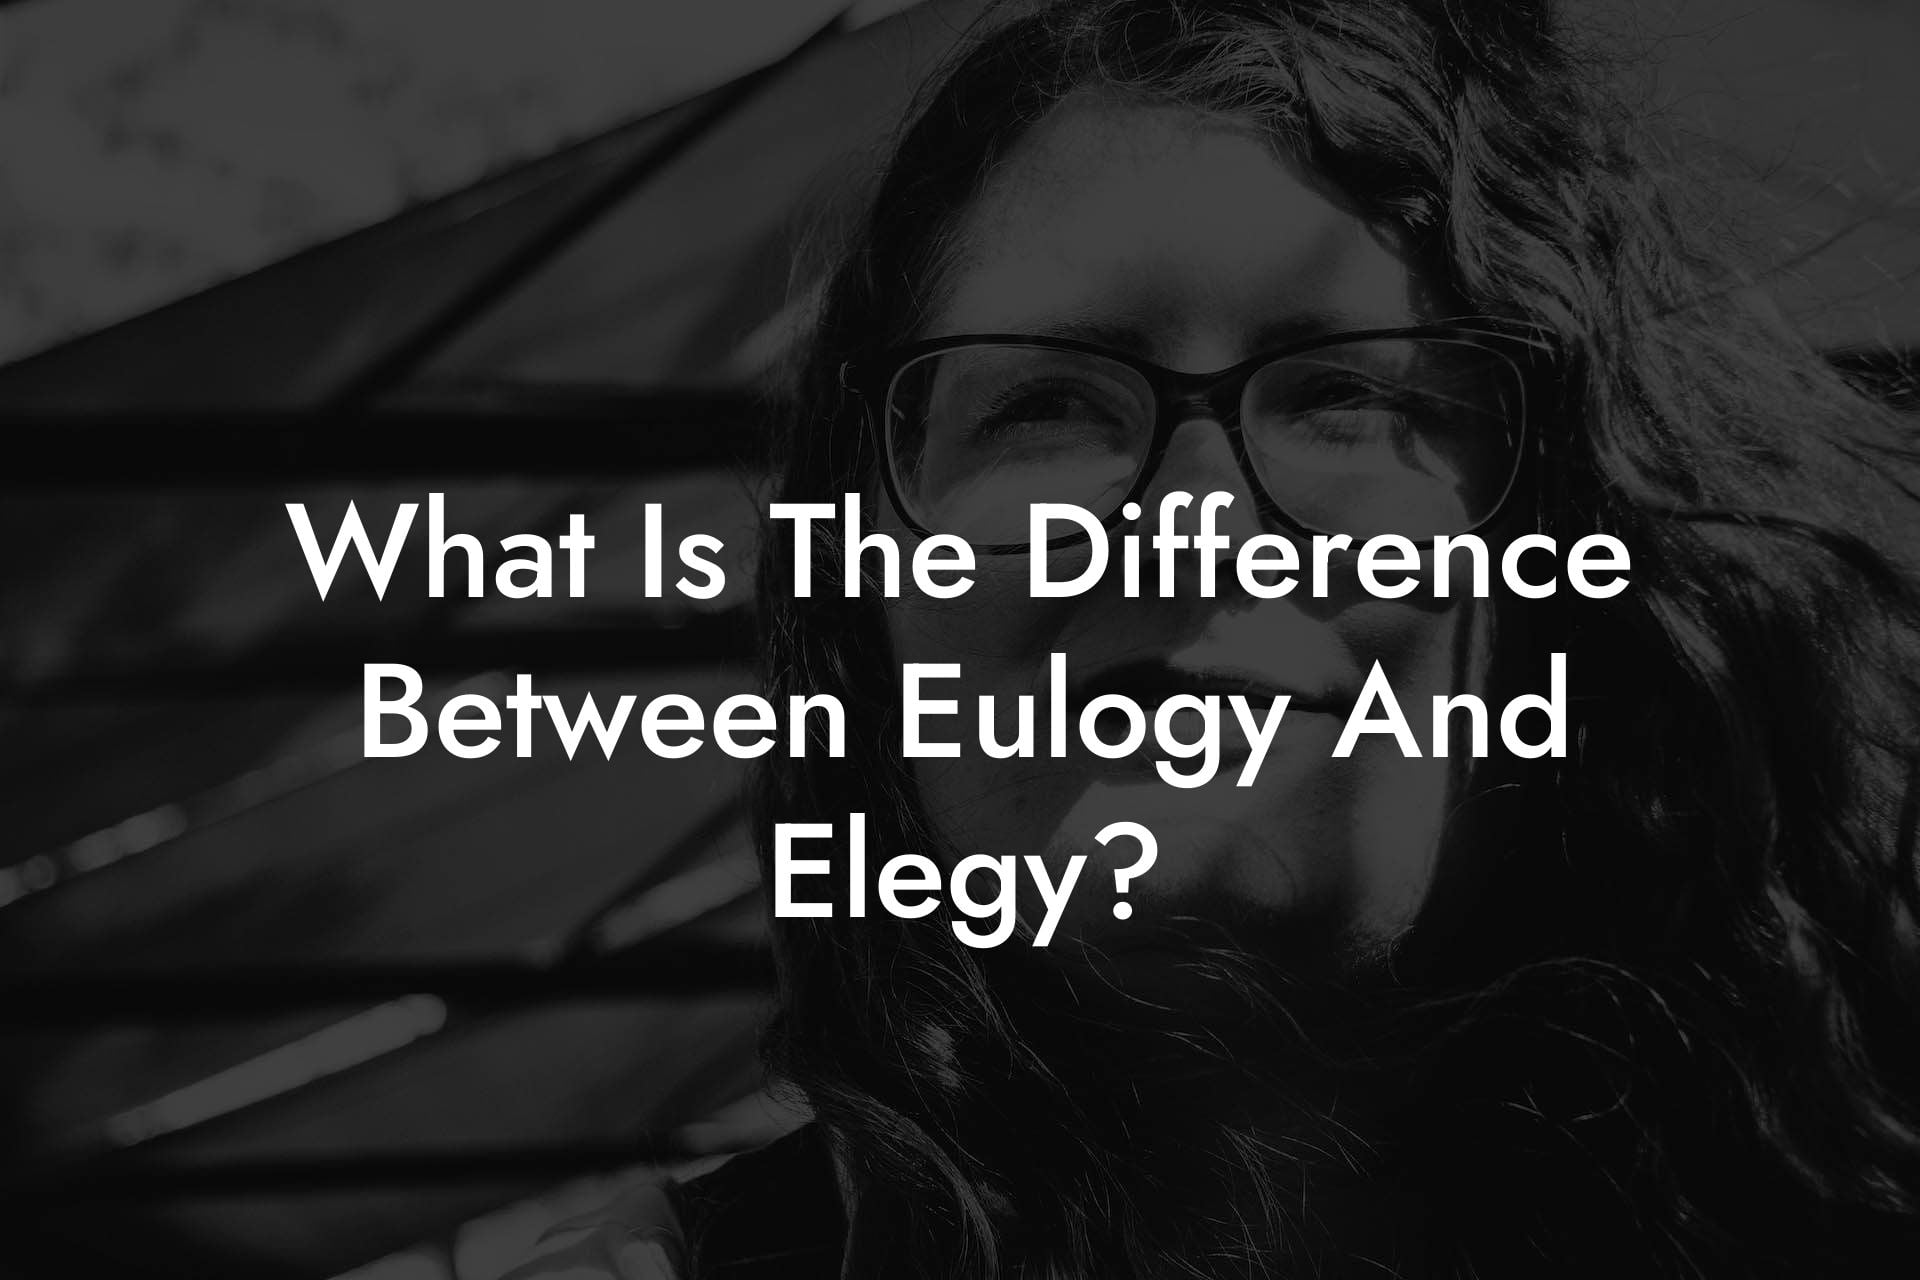 What Is The Difference Between Eulogy And Elegy